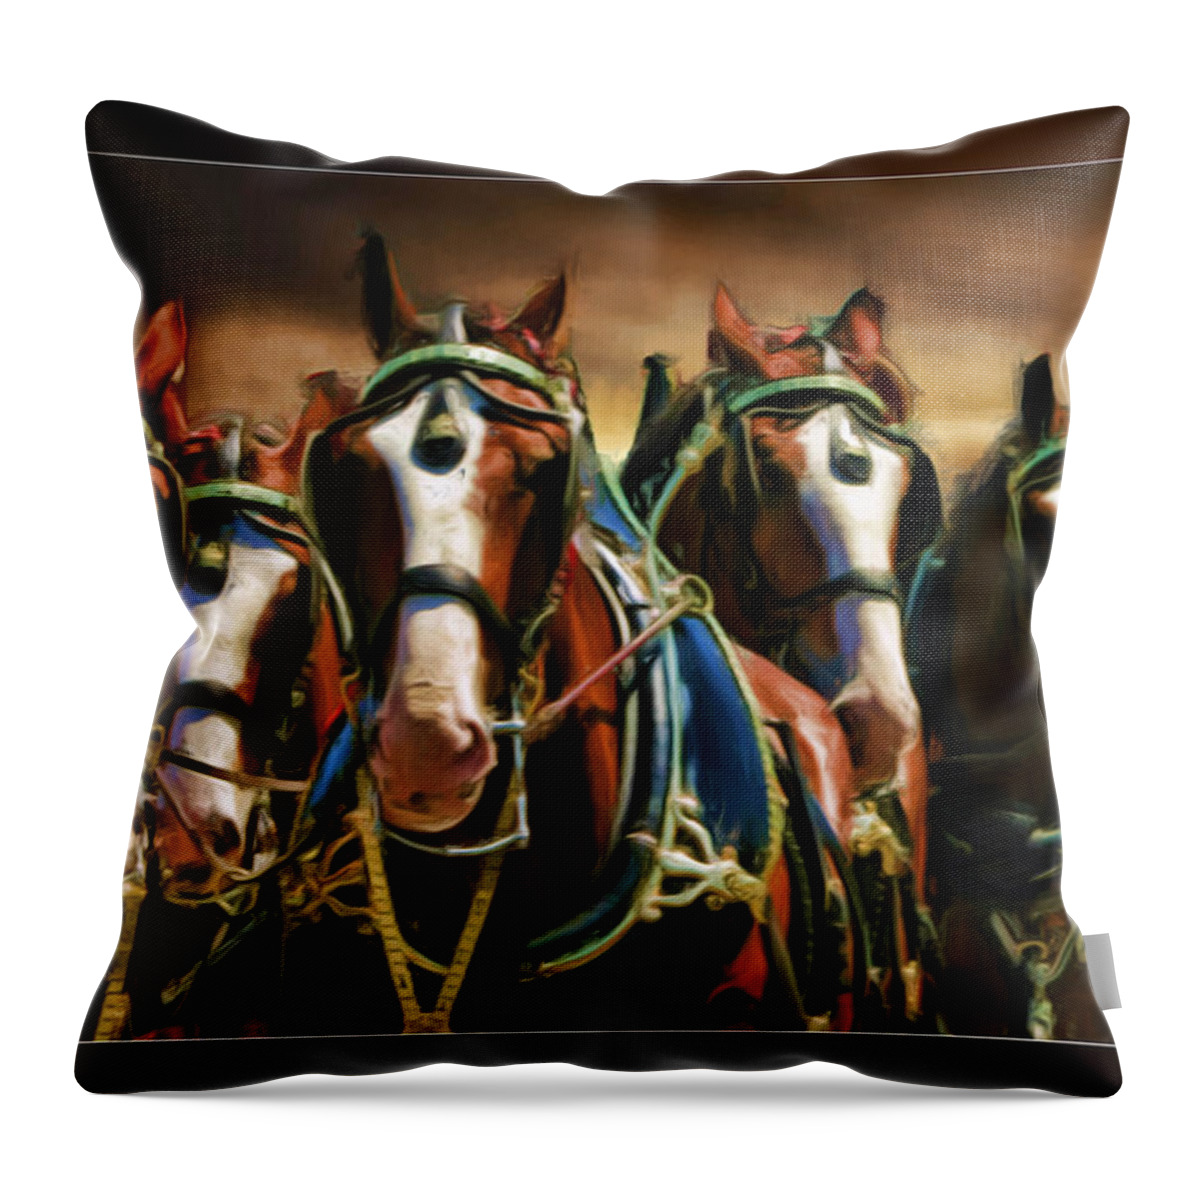 Horse Throw Pillow featuring the photograph Bud Boys by Blake Richards